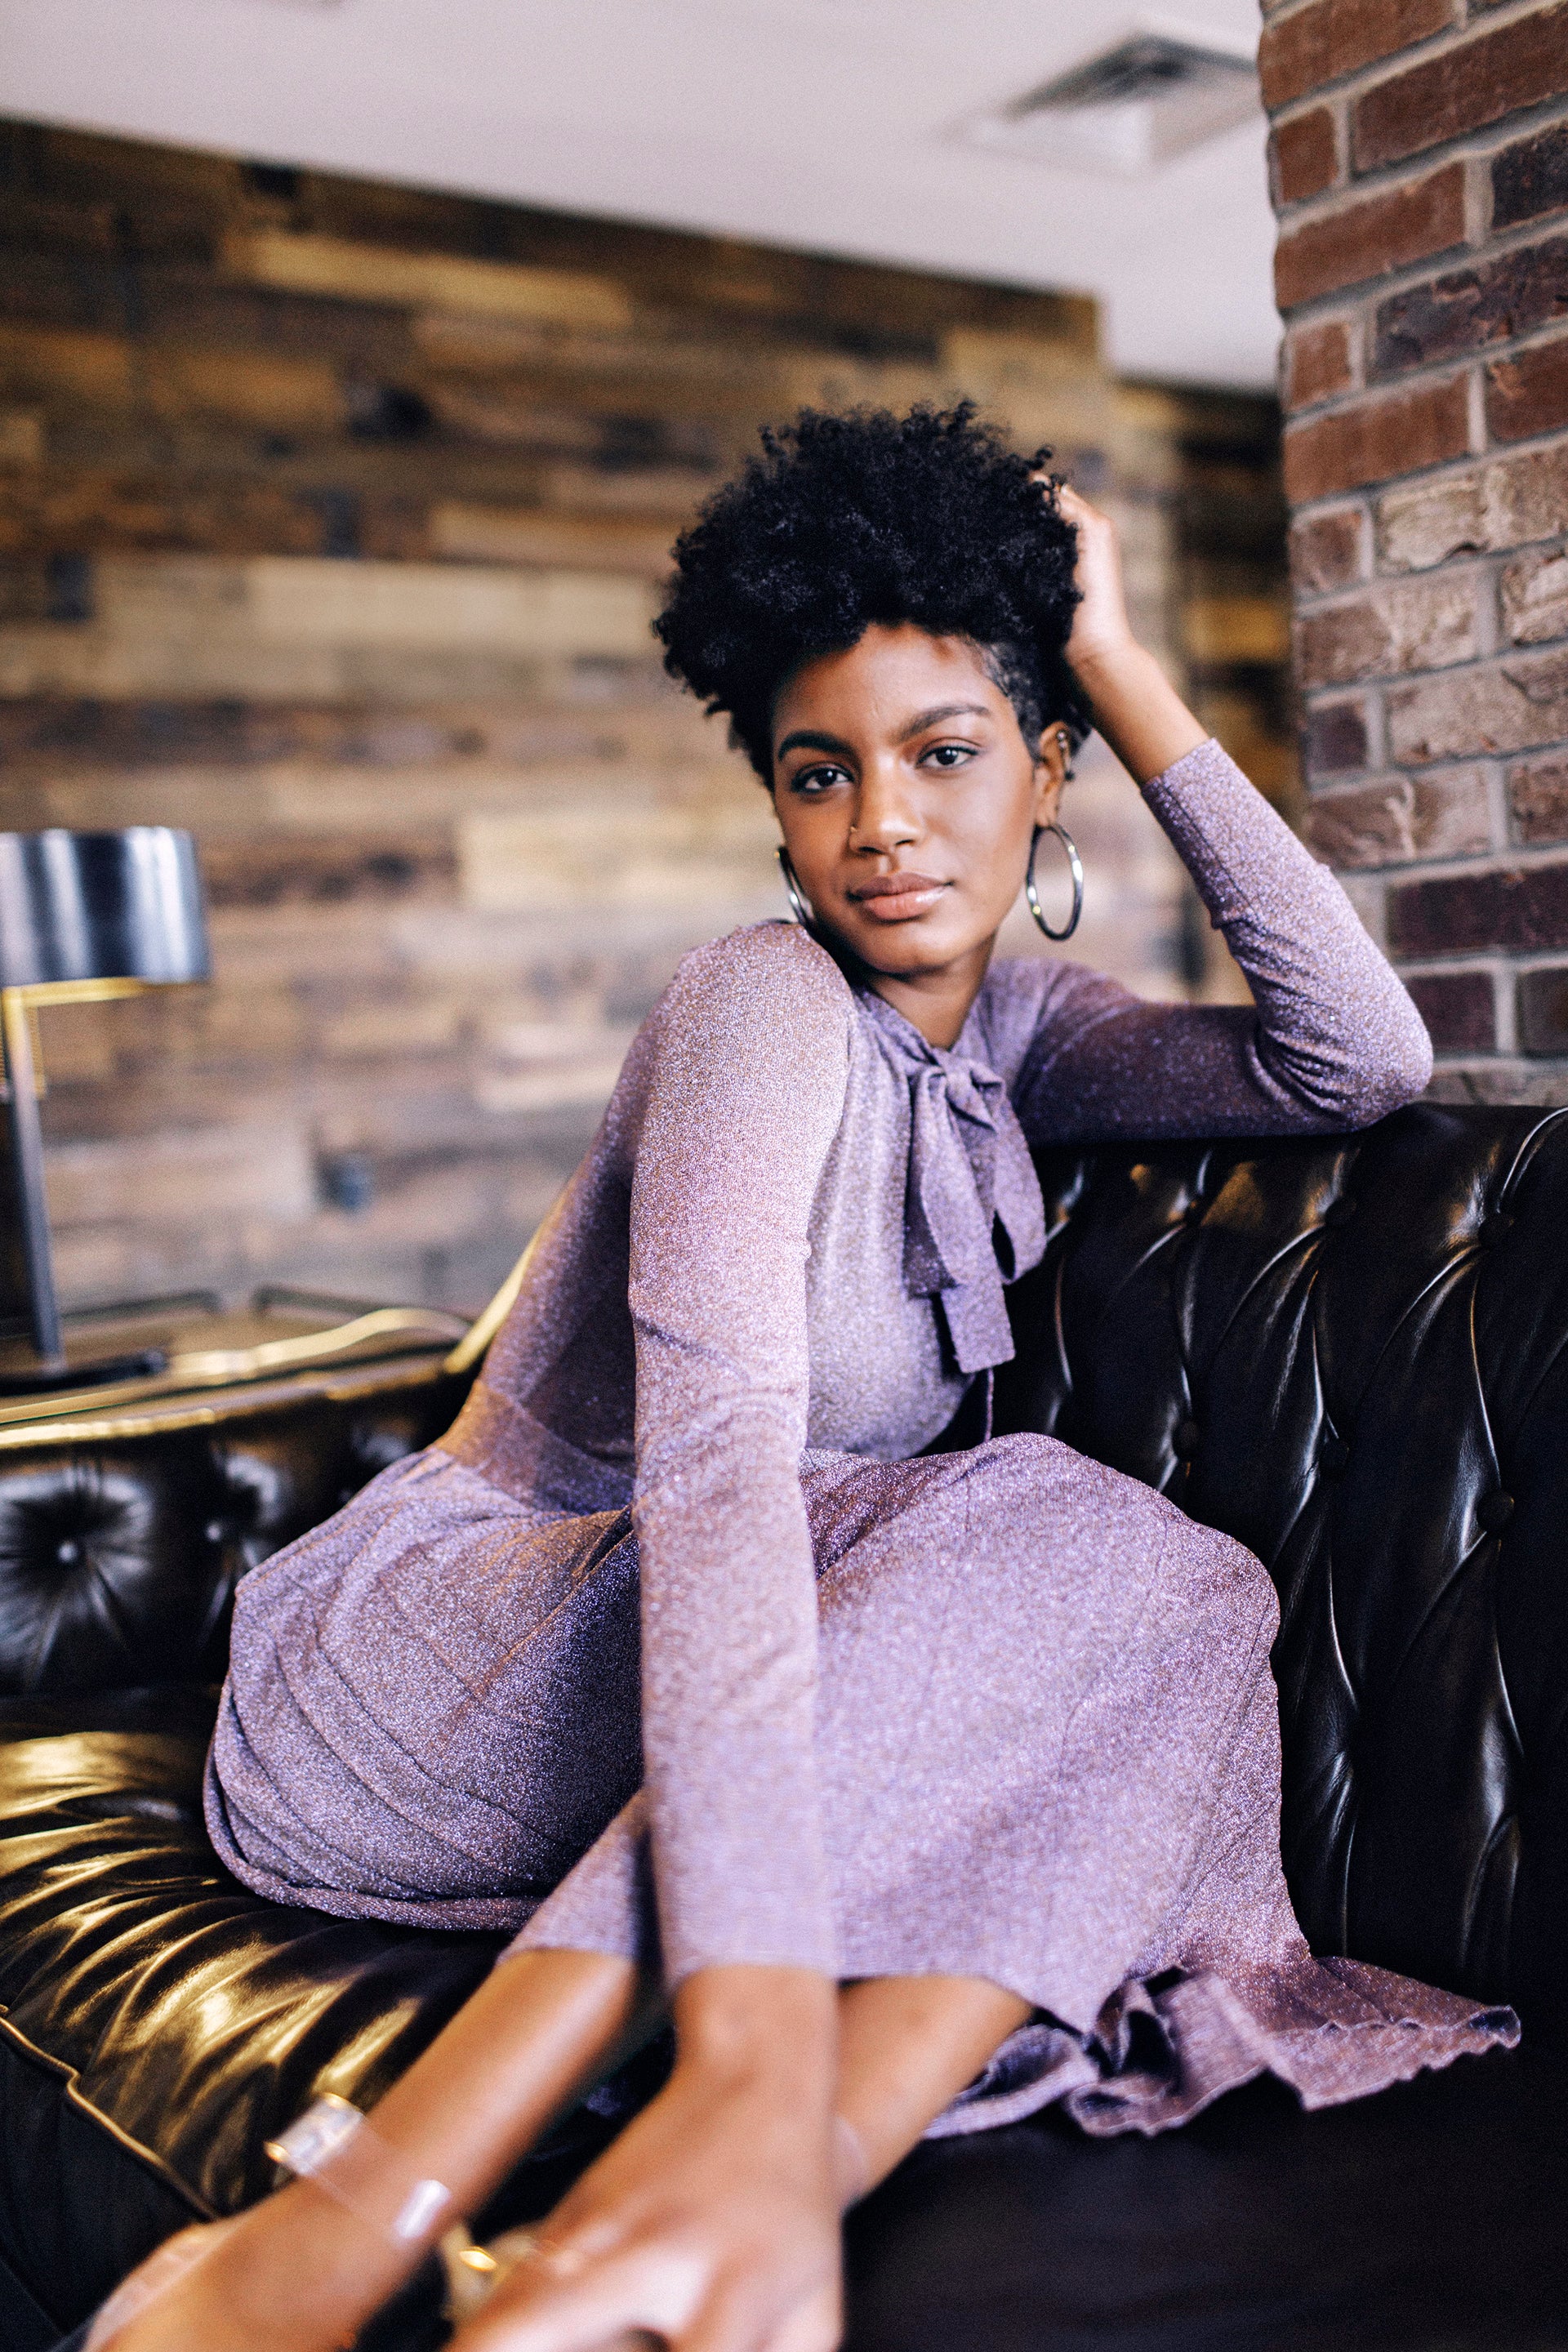 Ebonee Davis Opens Up About Modeling With A Purpose
